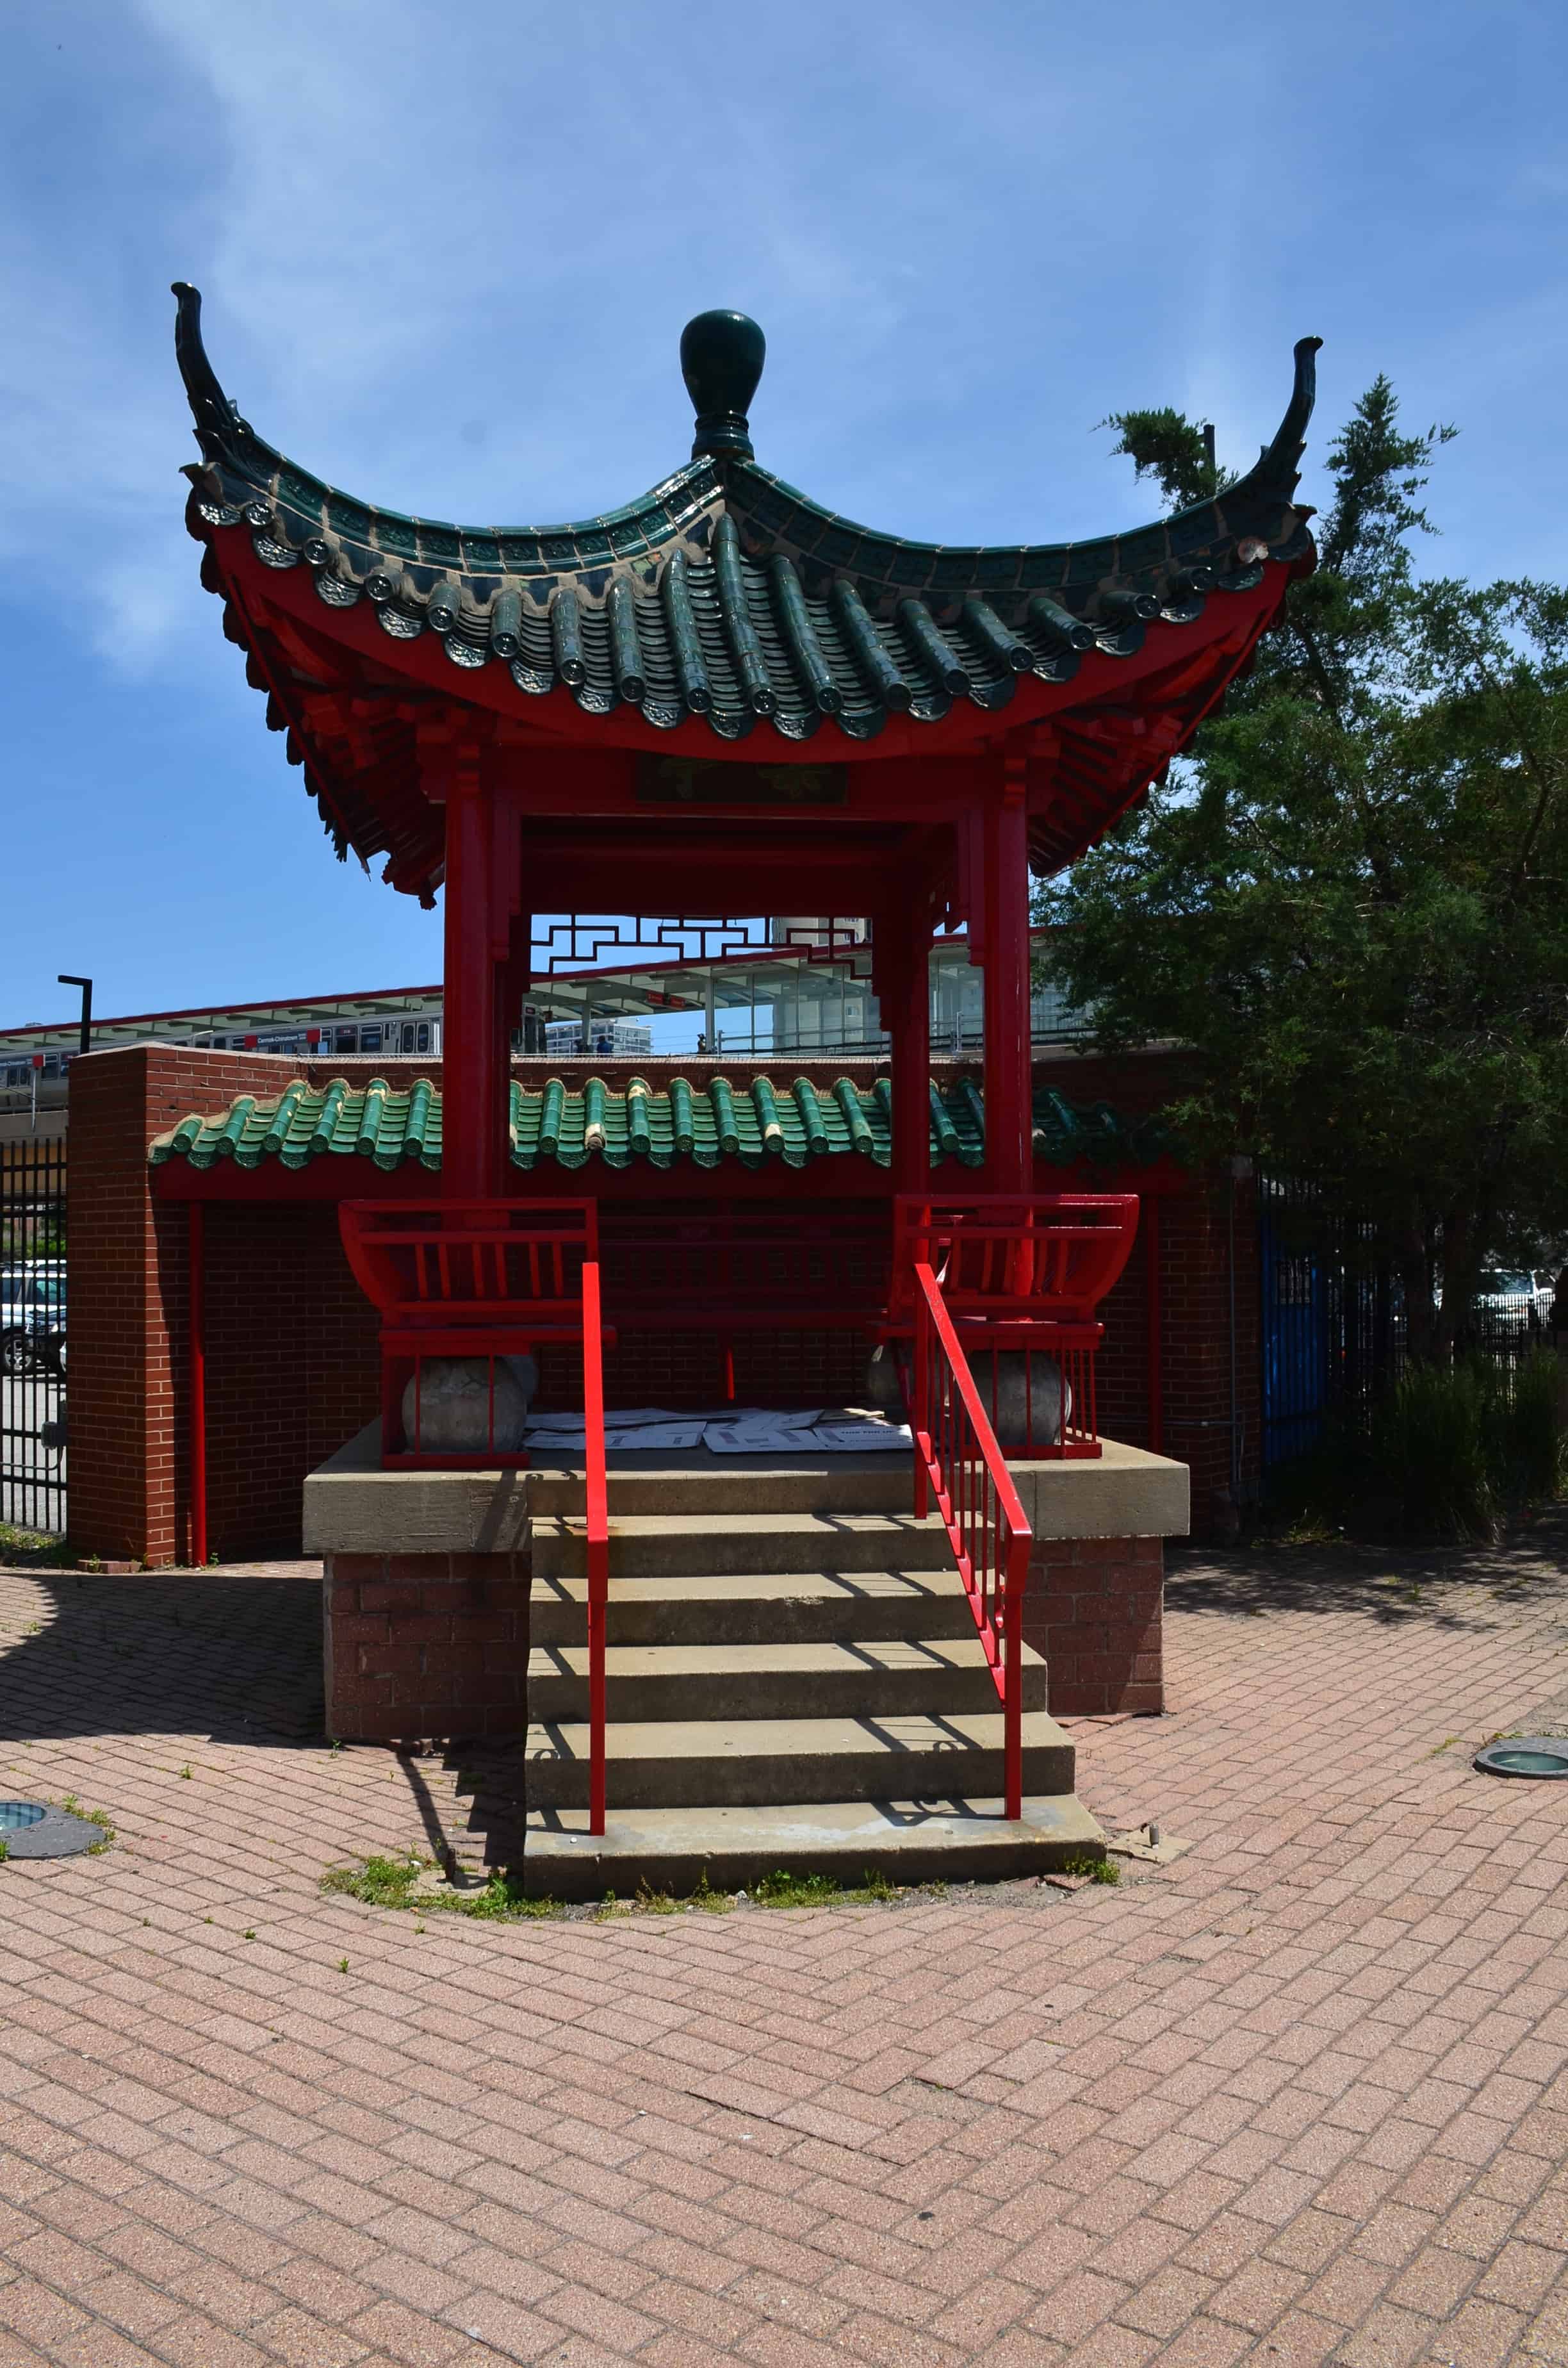 Chinese Pavilion in Chinatown, Chicago, Illinois